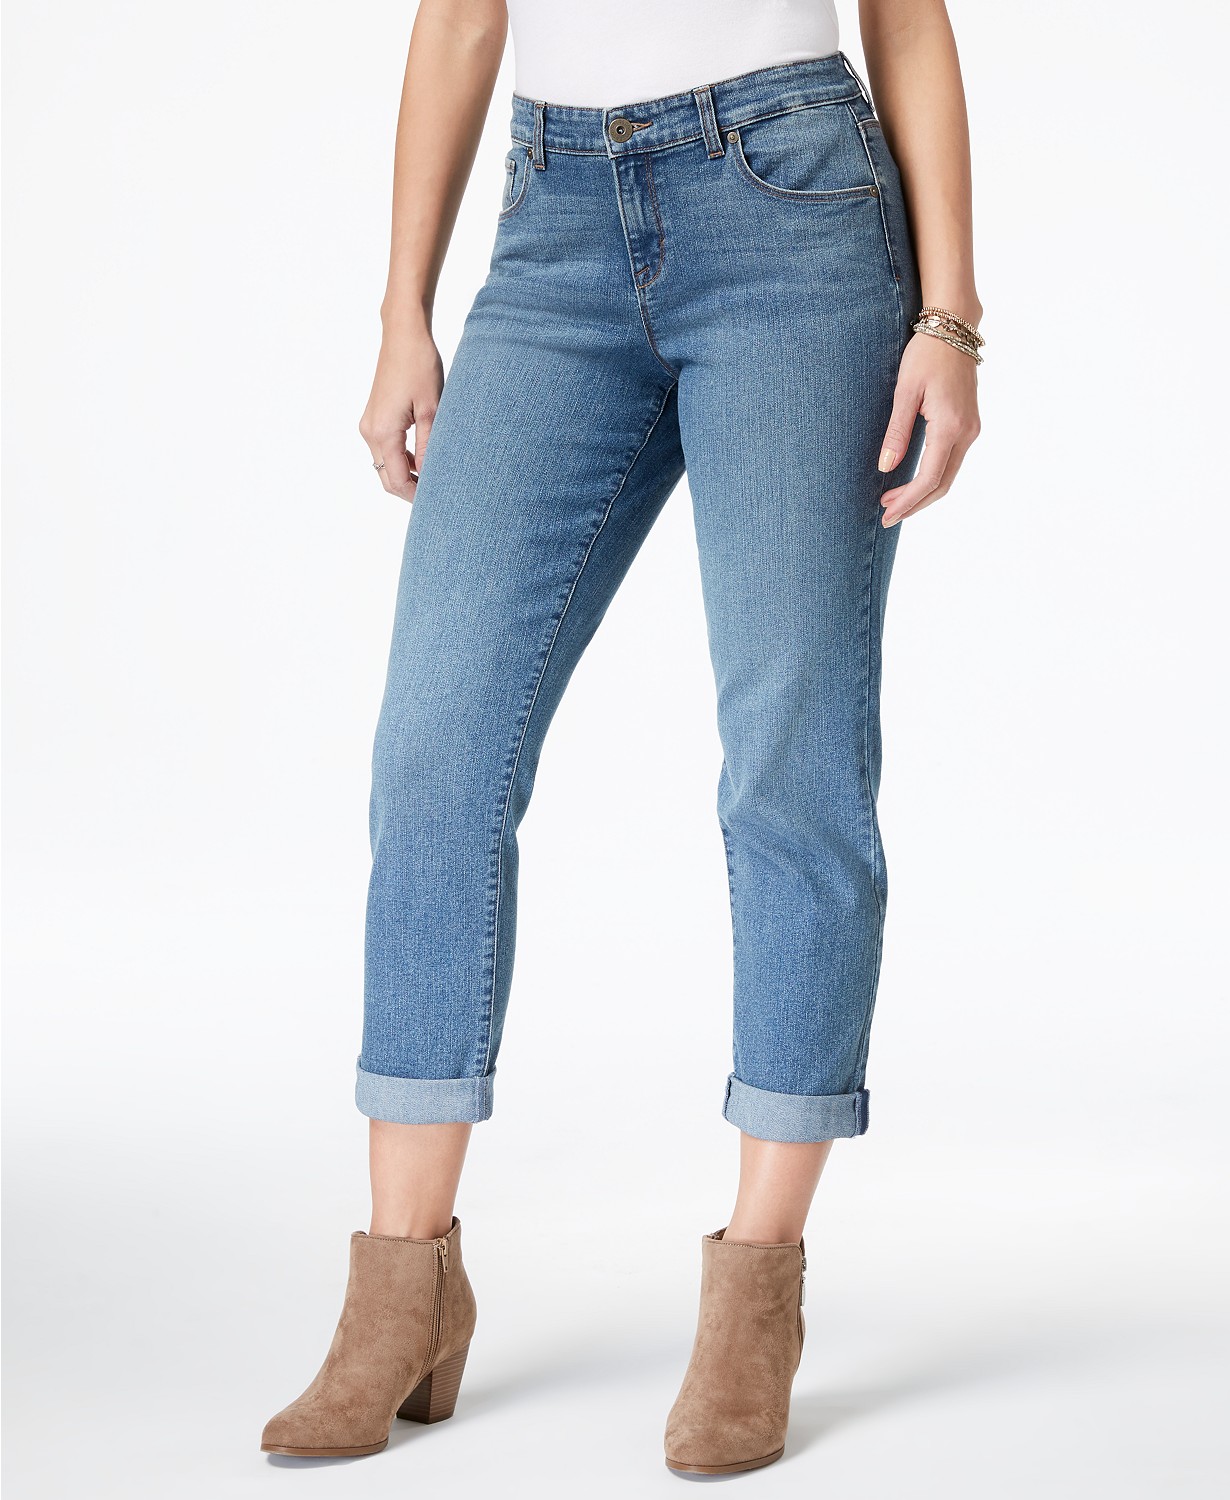 www.couturepoint.com-style-co-womens-blue-curvy-fit-cuffed-boyfriend-jeans